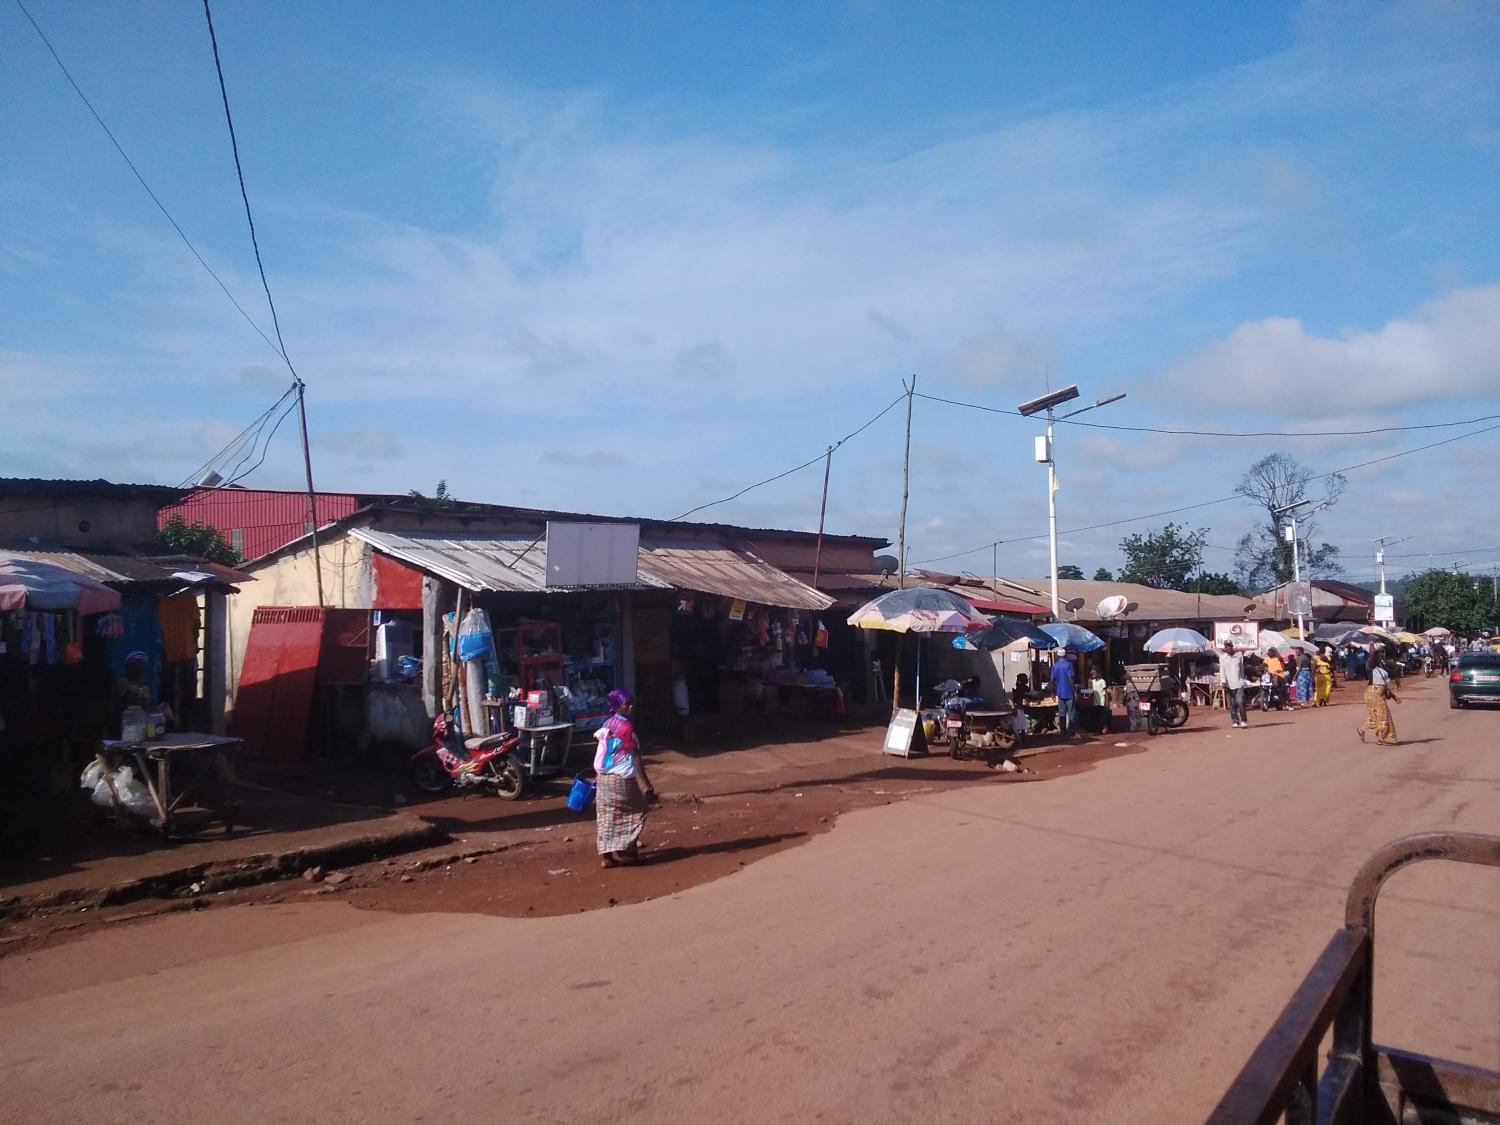 A view of the street near the market in Forecariah, Guinea